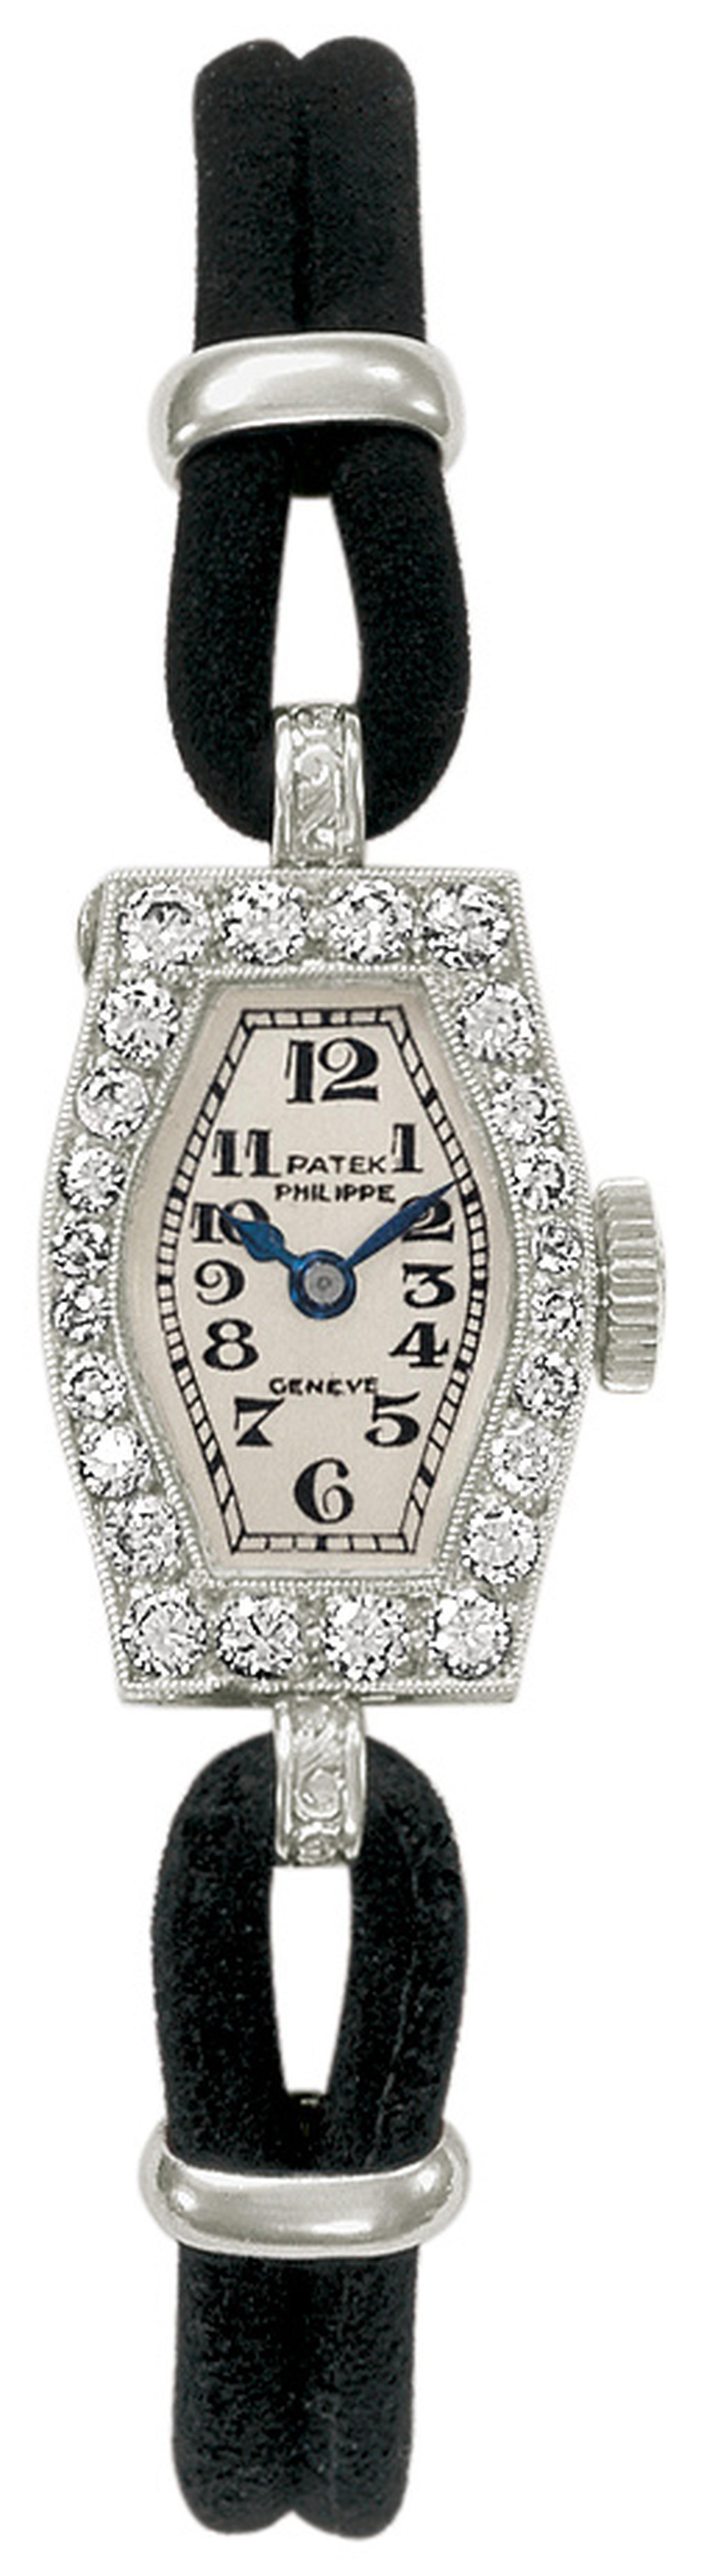 Patek-Philippe-P0587_a_100_collection-1925-40